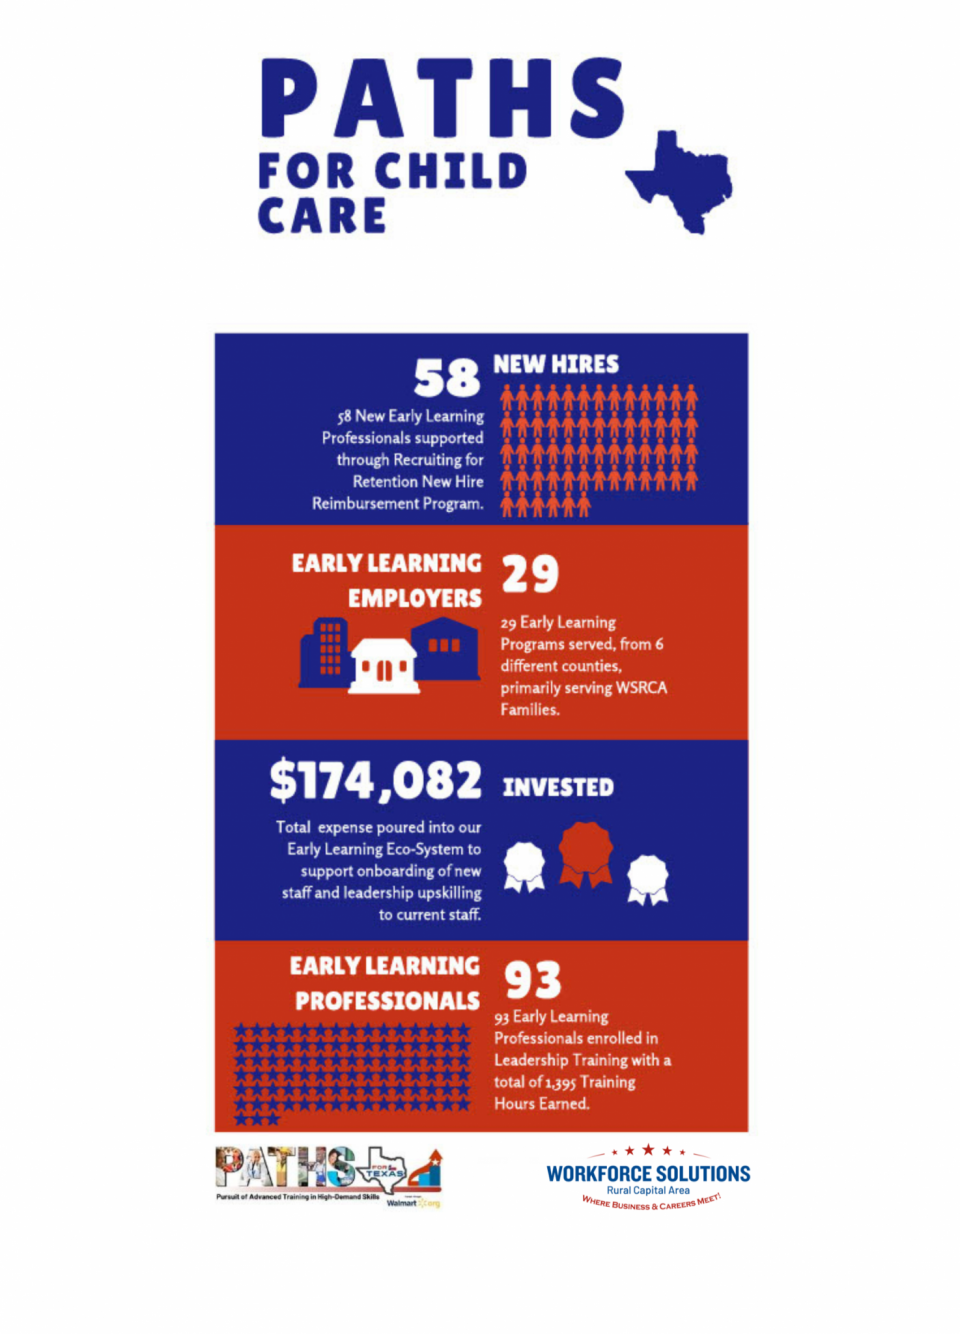 Paths For Child Care Program: Exciting Success of Paths For Child Care Program in Enhancing the Child Care Job Sector